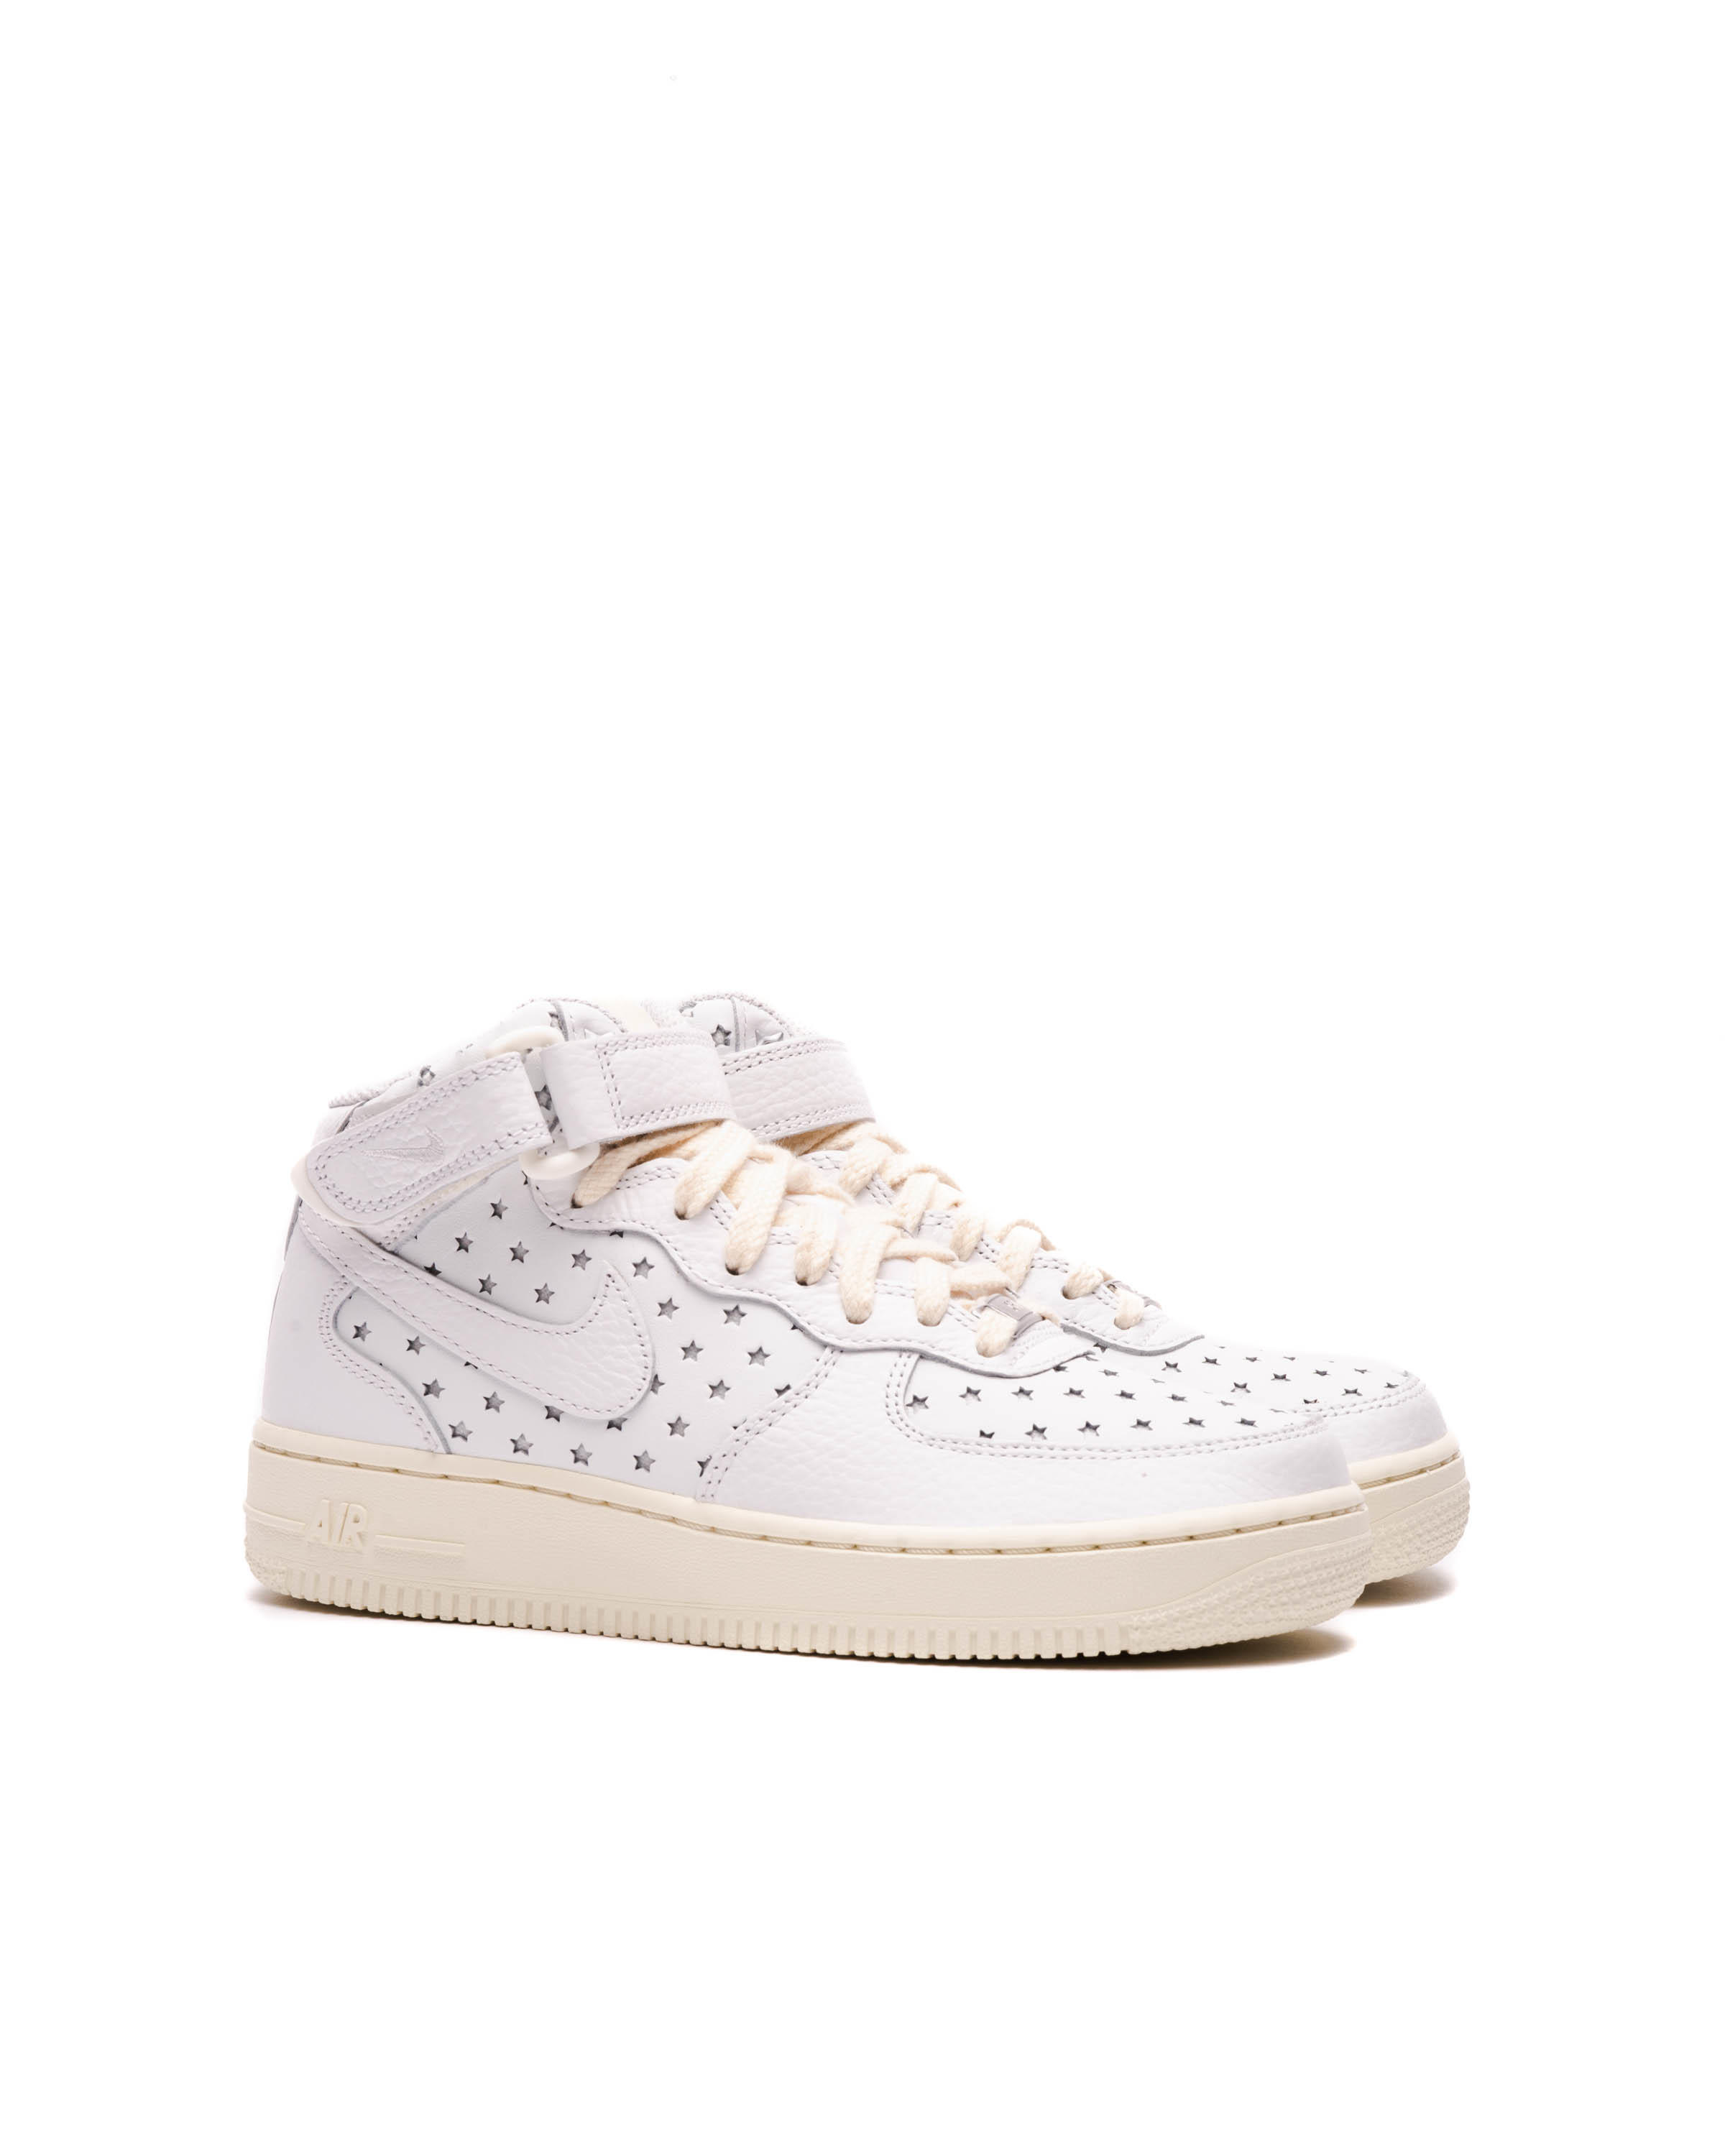 Nike WMNS AIR FORCE 1 MID